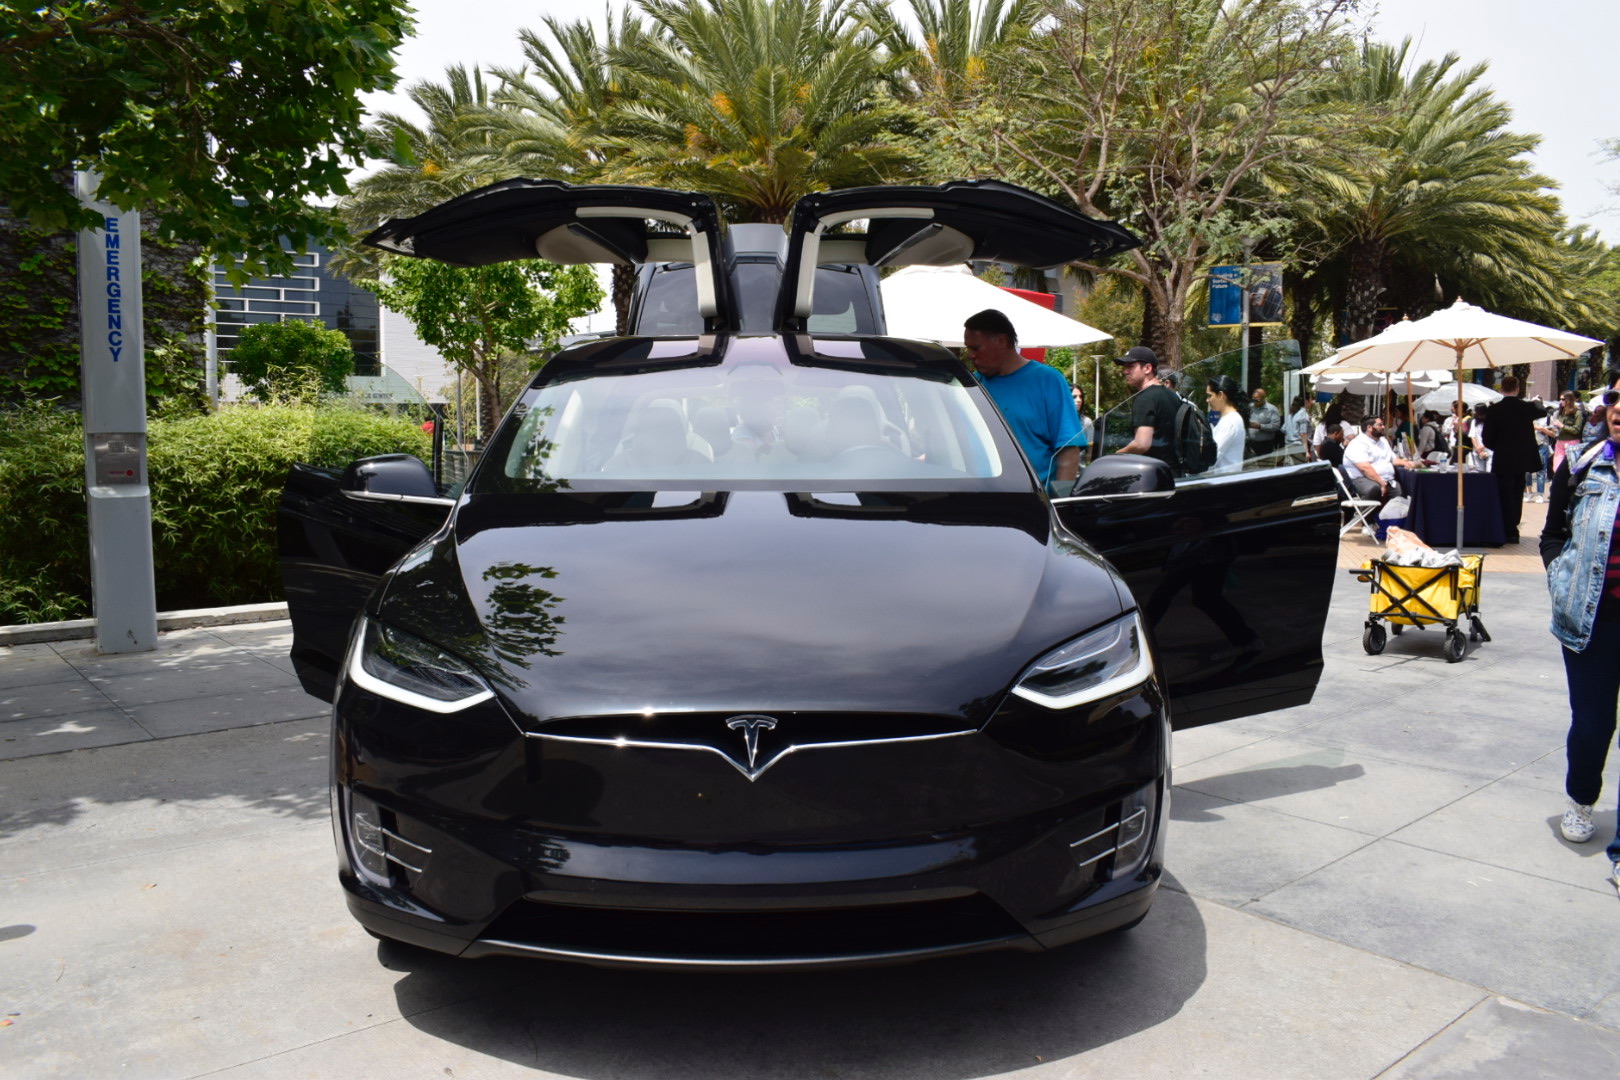  The Tesla car that was brought onto campus and drew a lot of attention during the Job Fair at the Santa Monica College quad on May 8, 2018. Students could try to sit in the Tesla while talking to the Tesla representatives about opportunities at thei